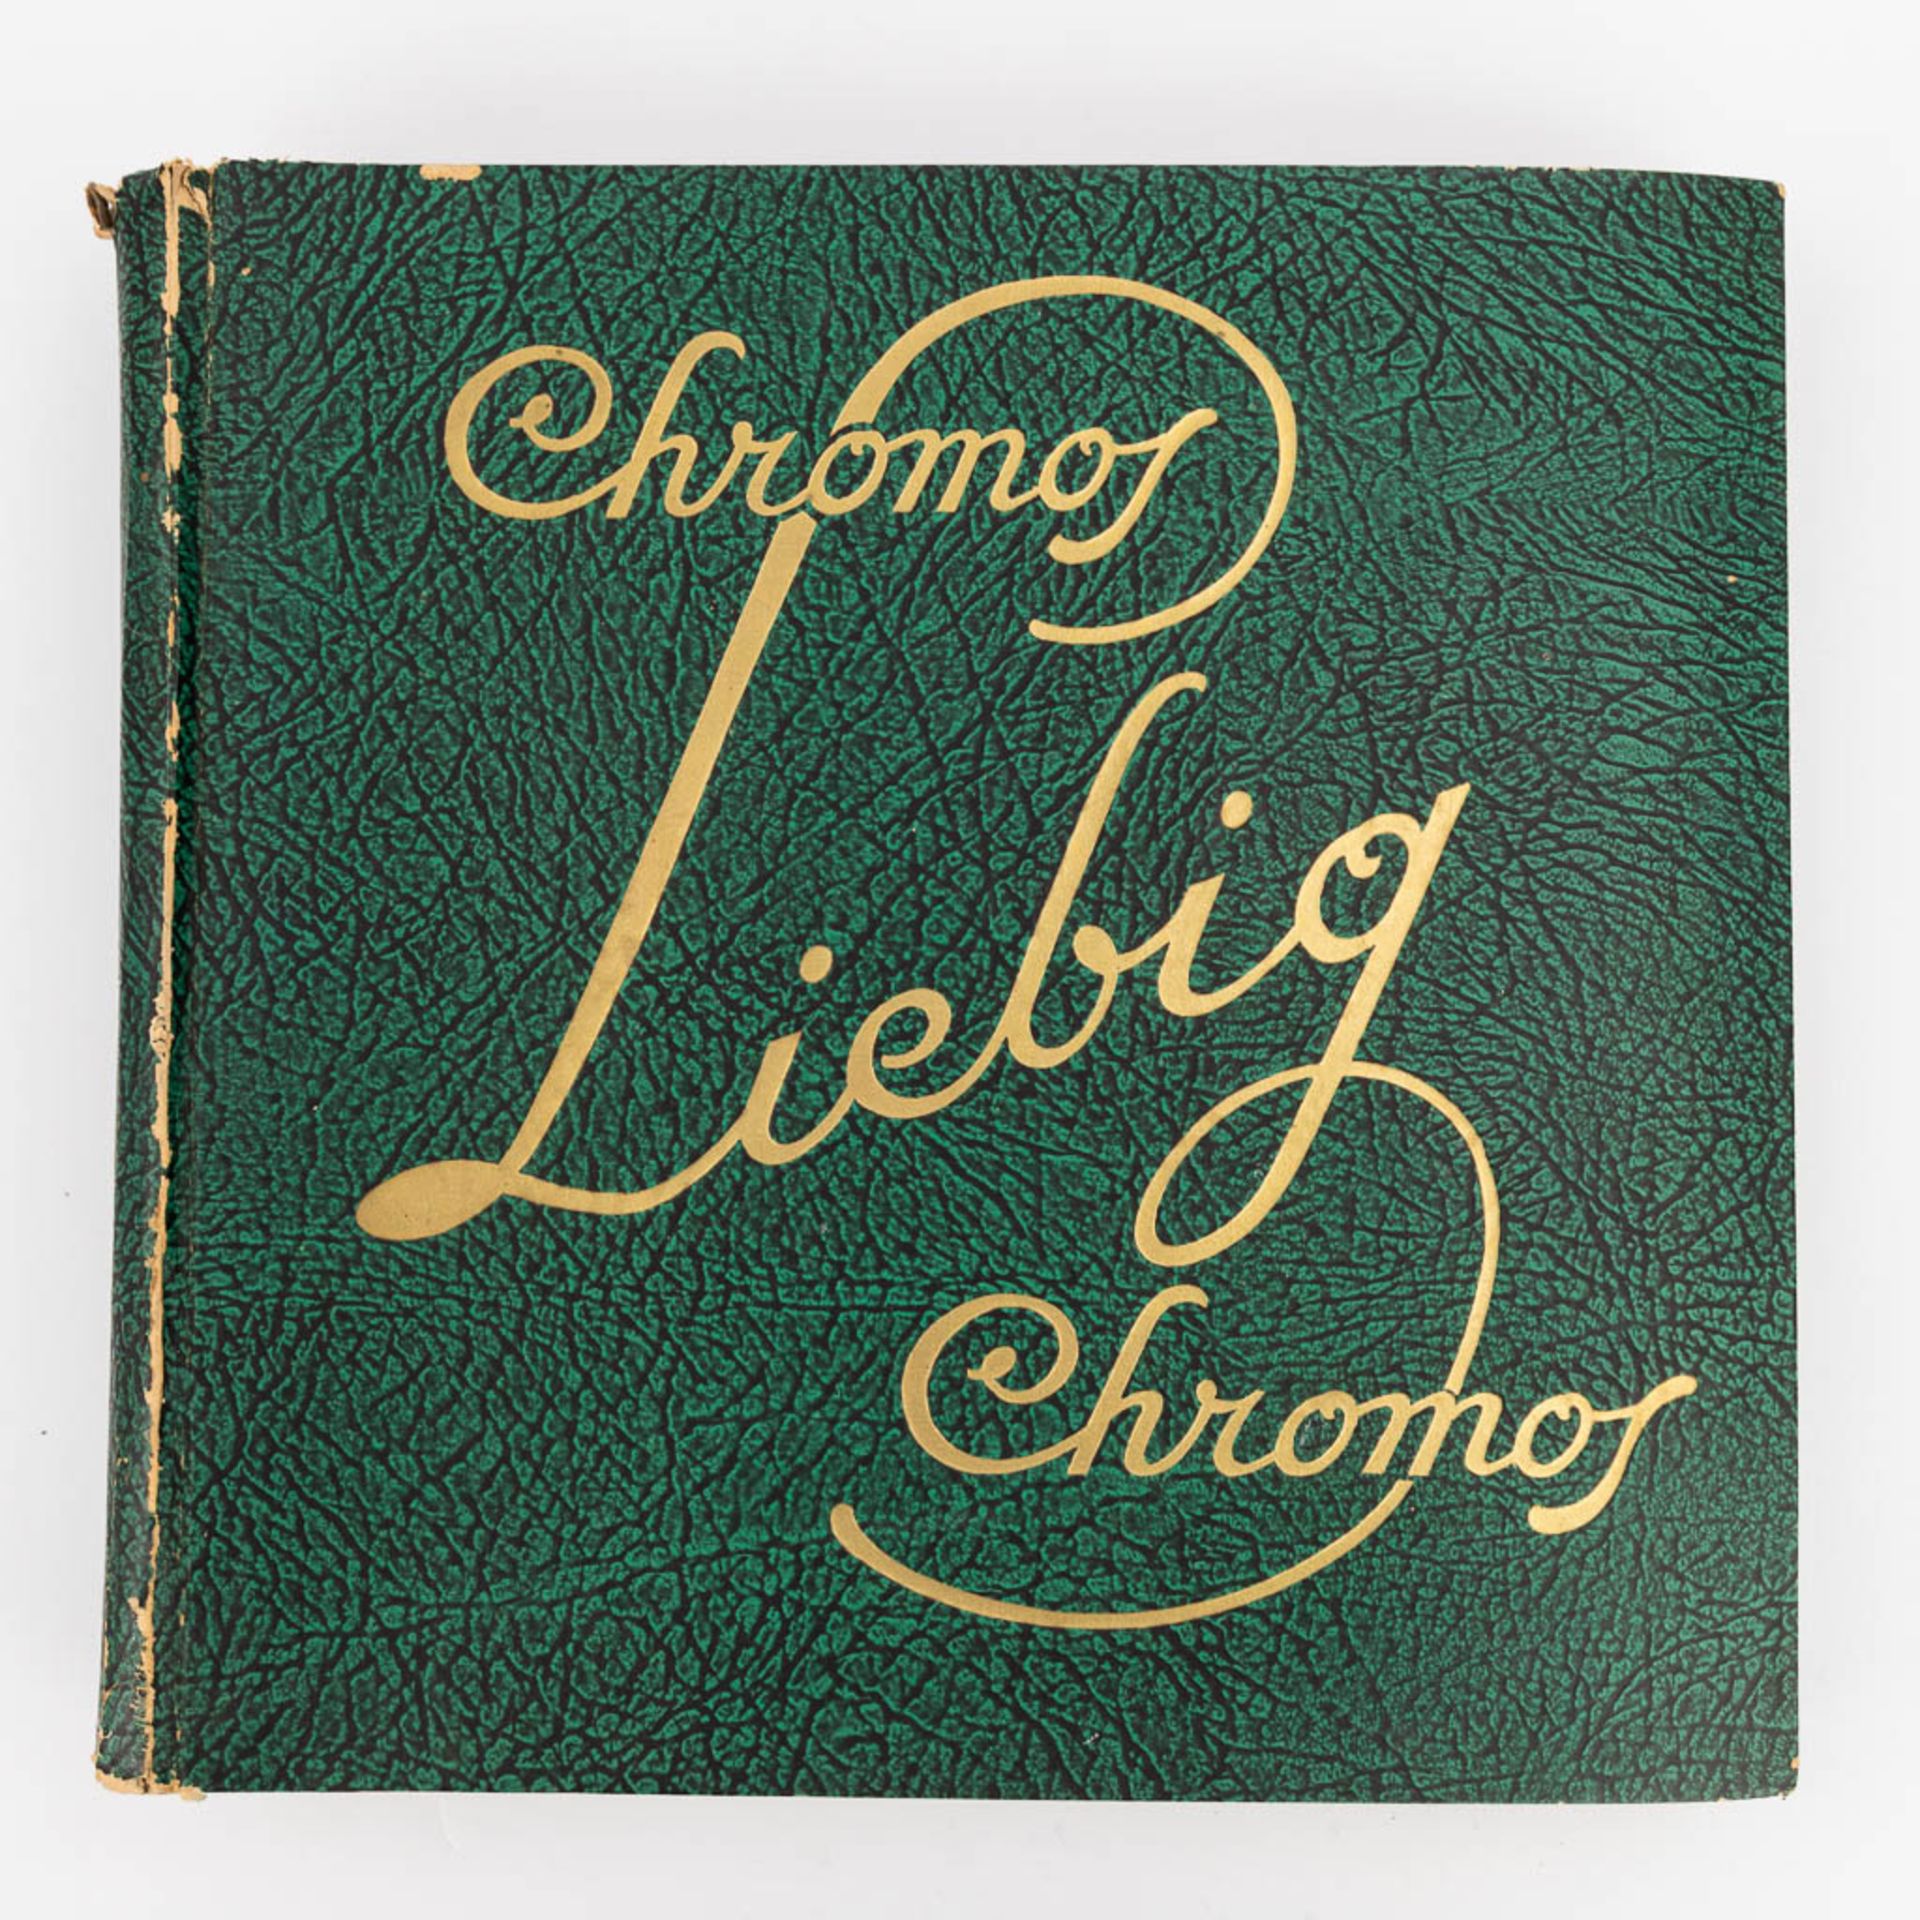 A collection of 6 books with cards by 'Chromos Liebig'. (W:30 x H:29 cm) - Image 14 of 31